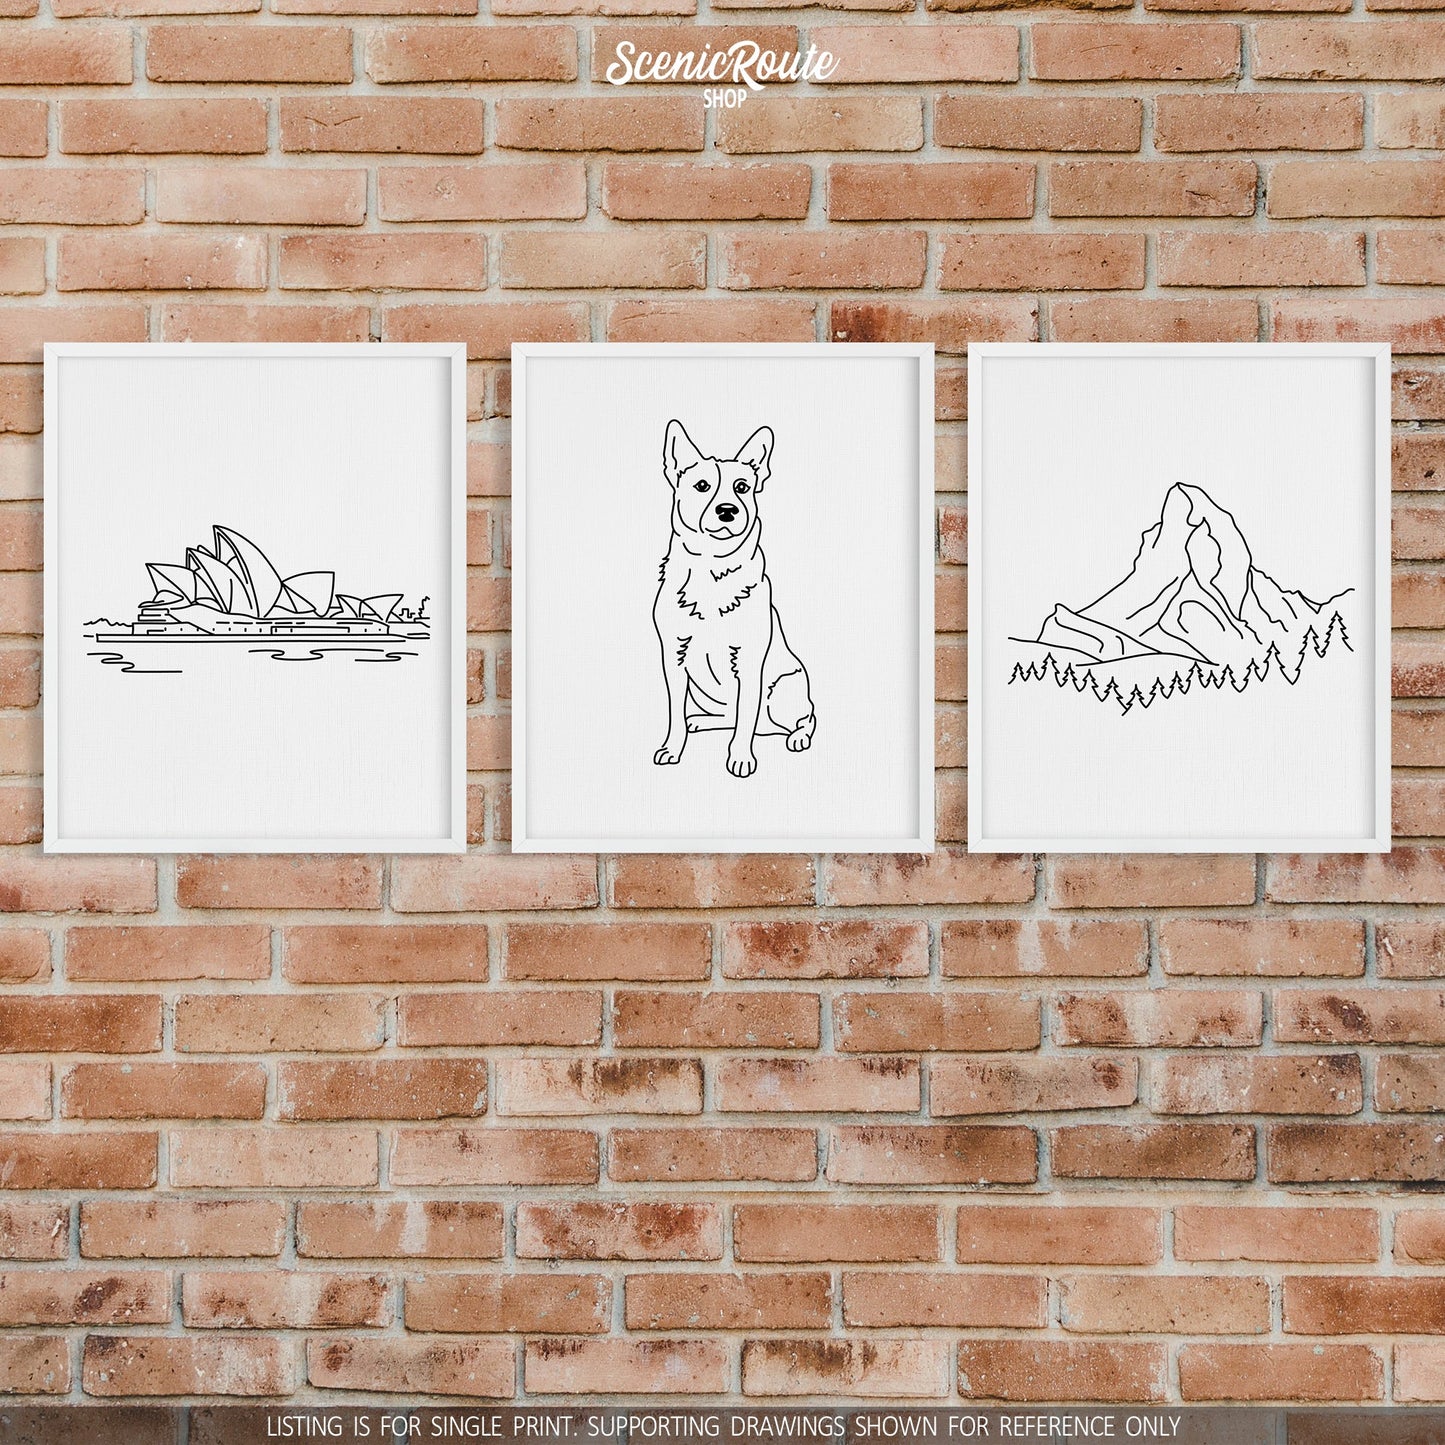 A group of three framed drawings on a brick wall.  The line art drawings include Sydney Opera House, Australian Cattle Dog, and Switzerland Matterhorn Mountain.